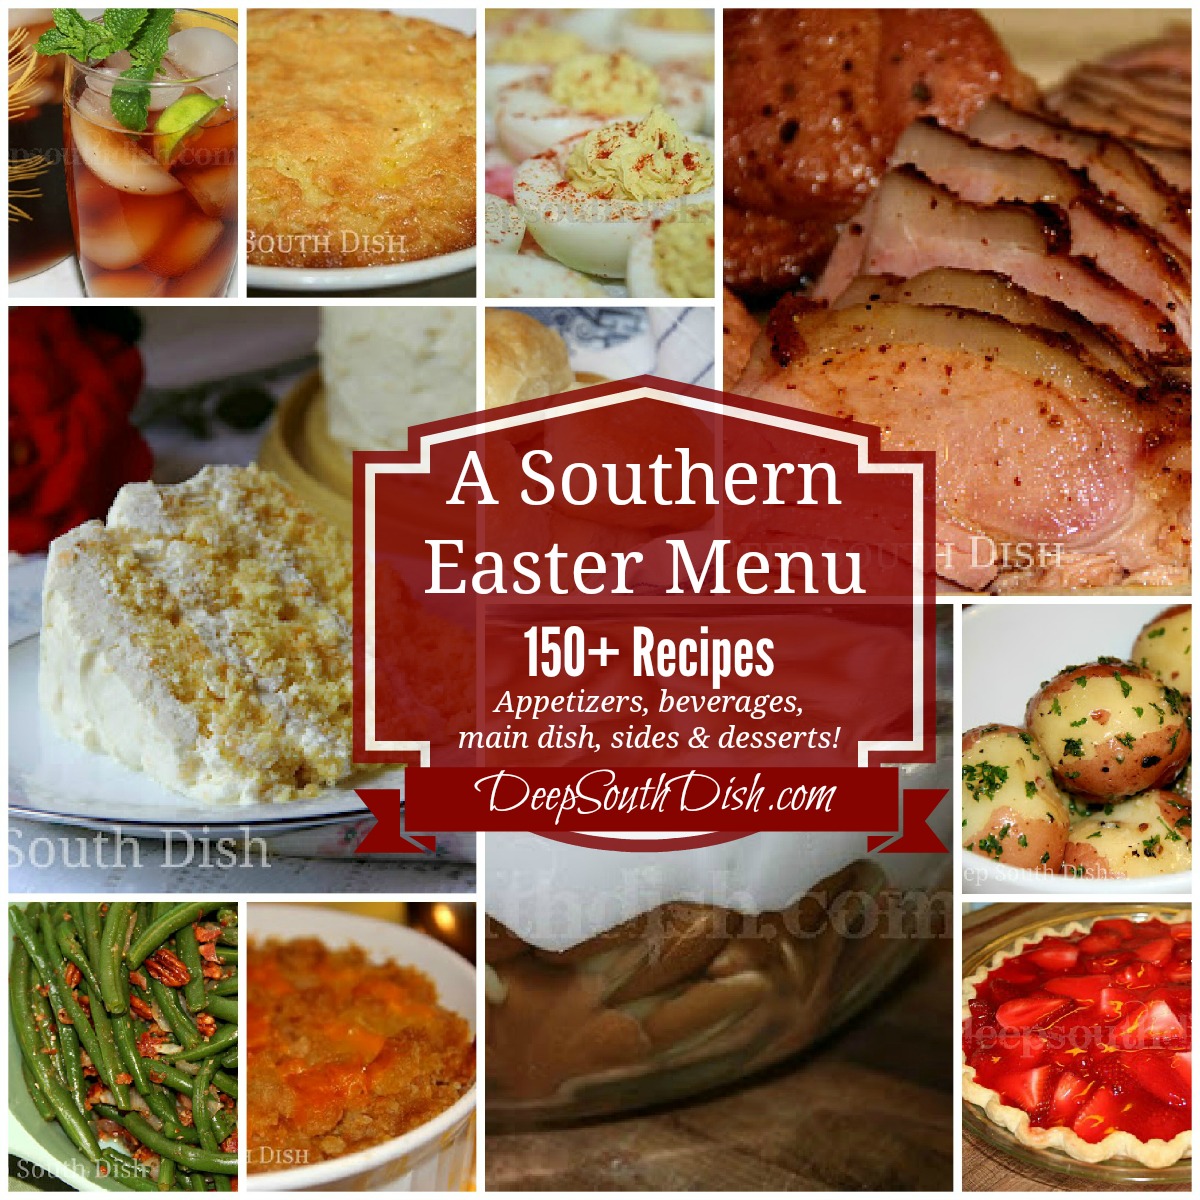 Deep South Dish Southern Easter Menu Ideas And Recipes